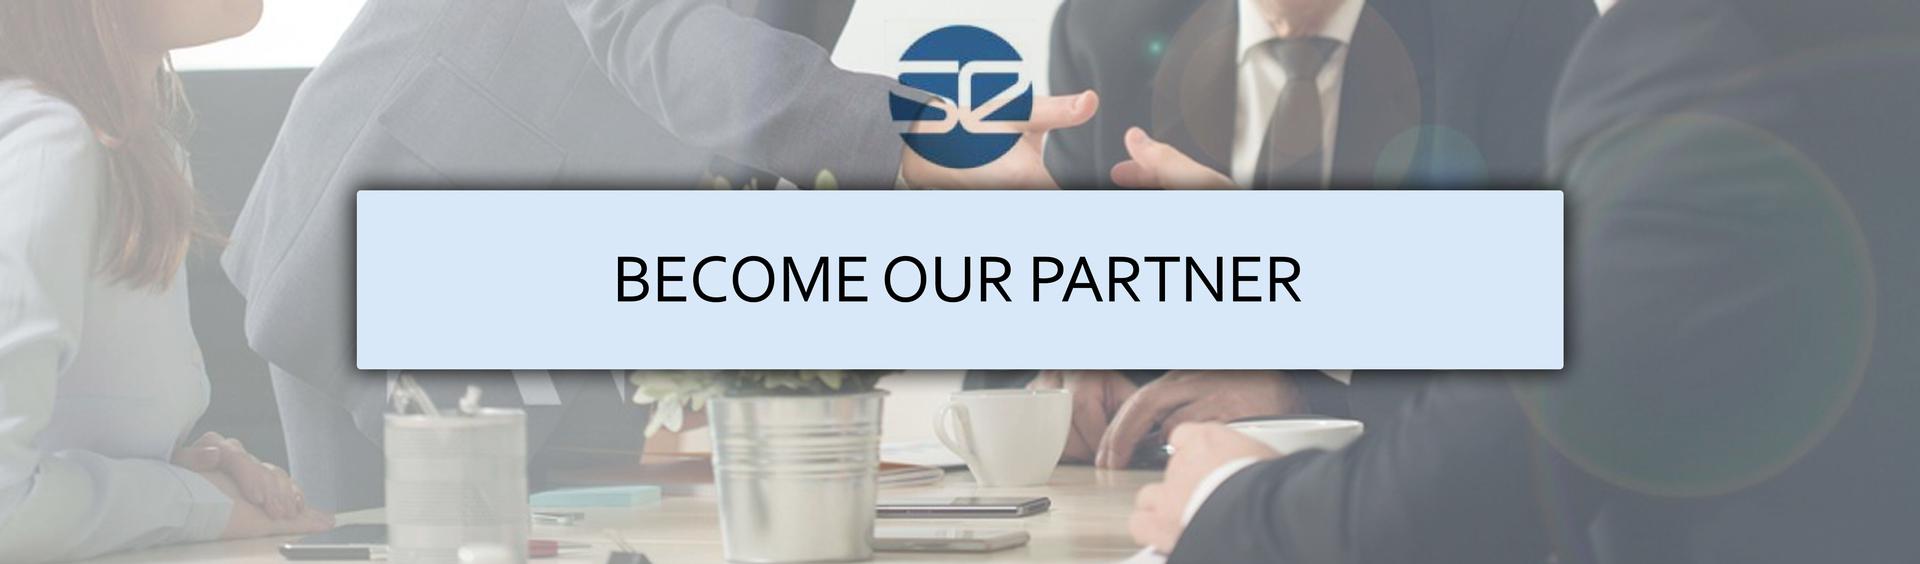 Become our partner